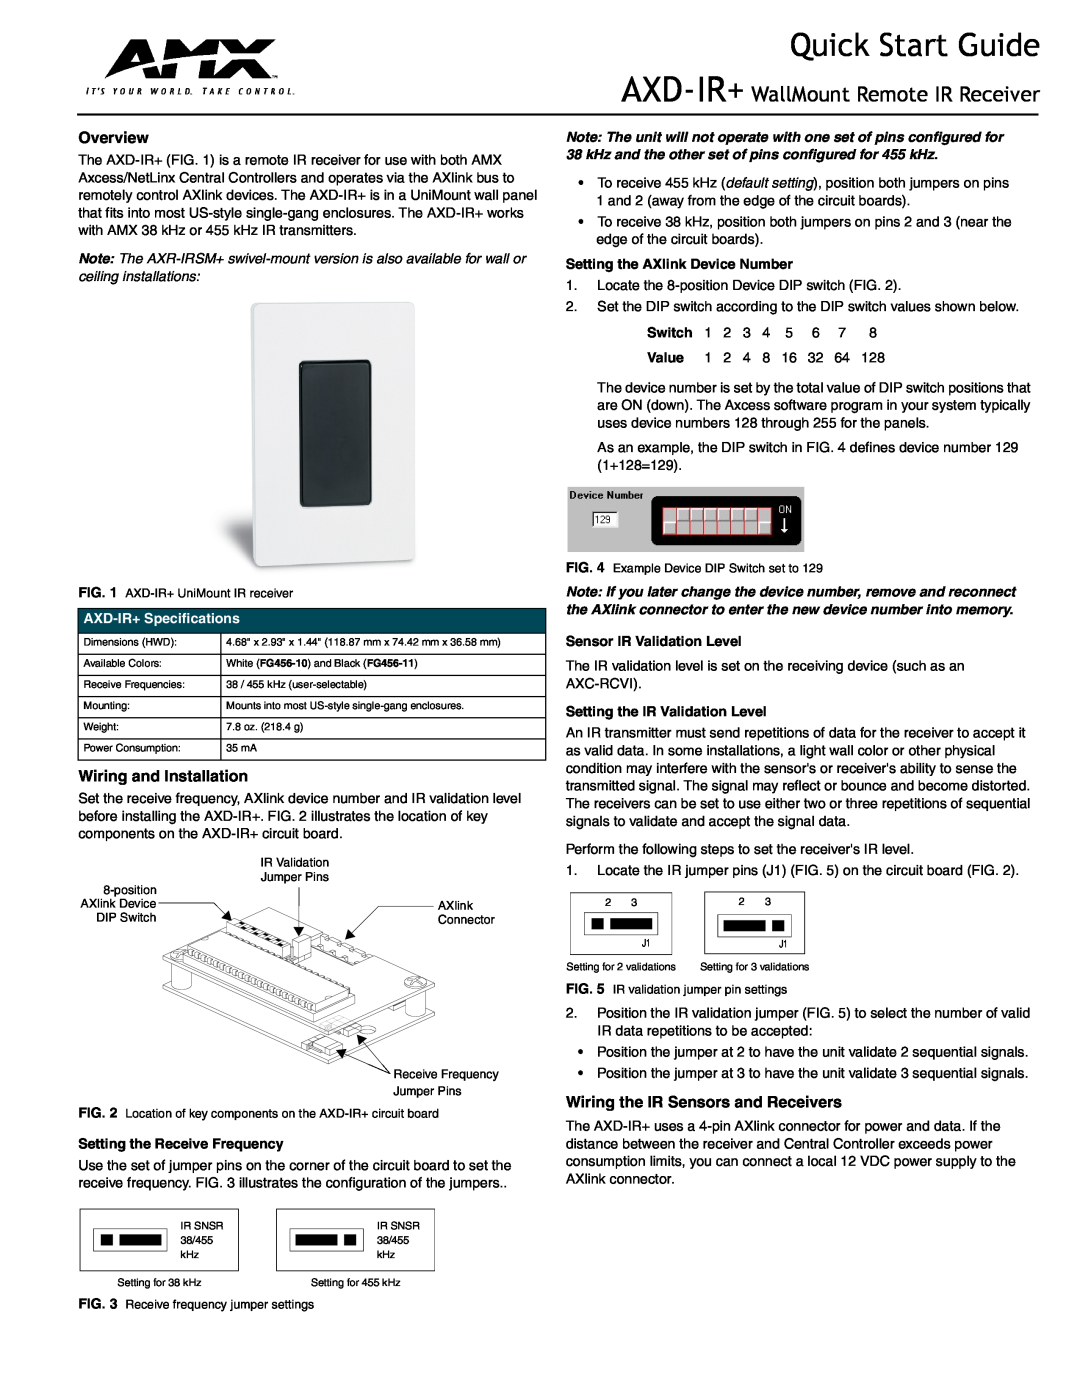 AMX quick start Overview, Wiring and Installation, Wiring the IR Sensors and Receivers, AXD-IR+Specifications, Switch 